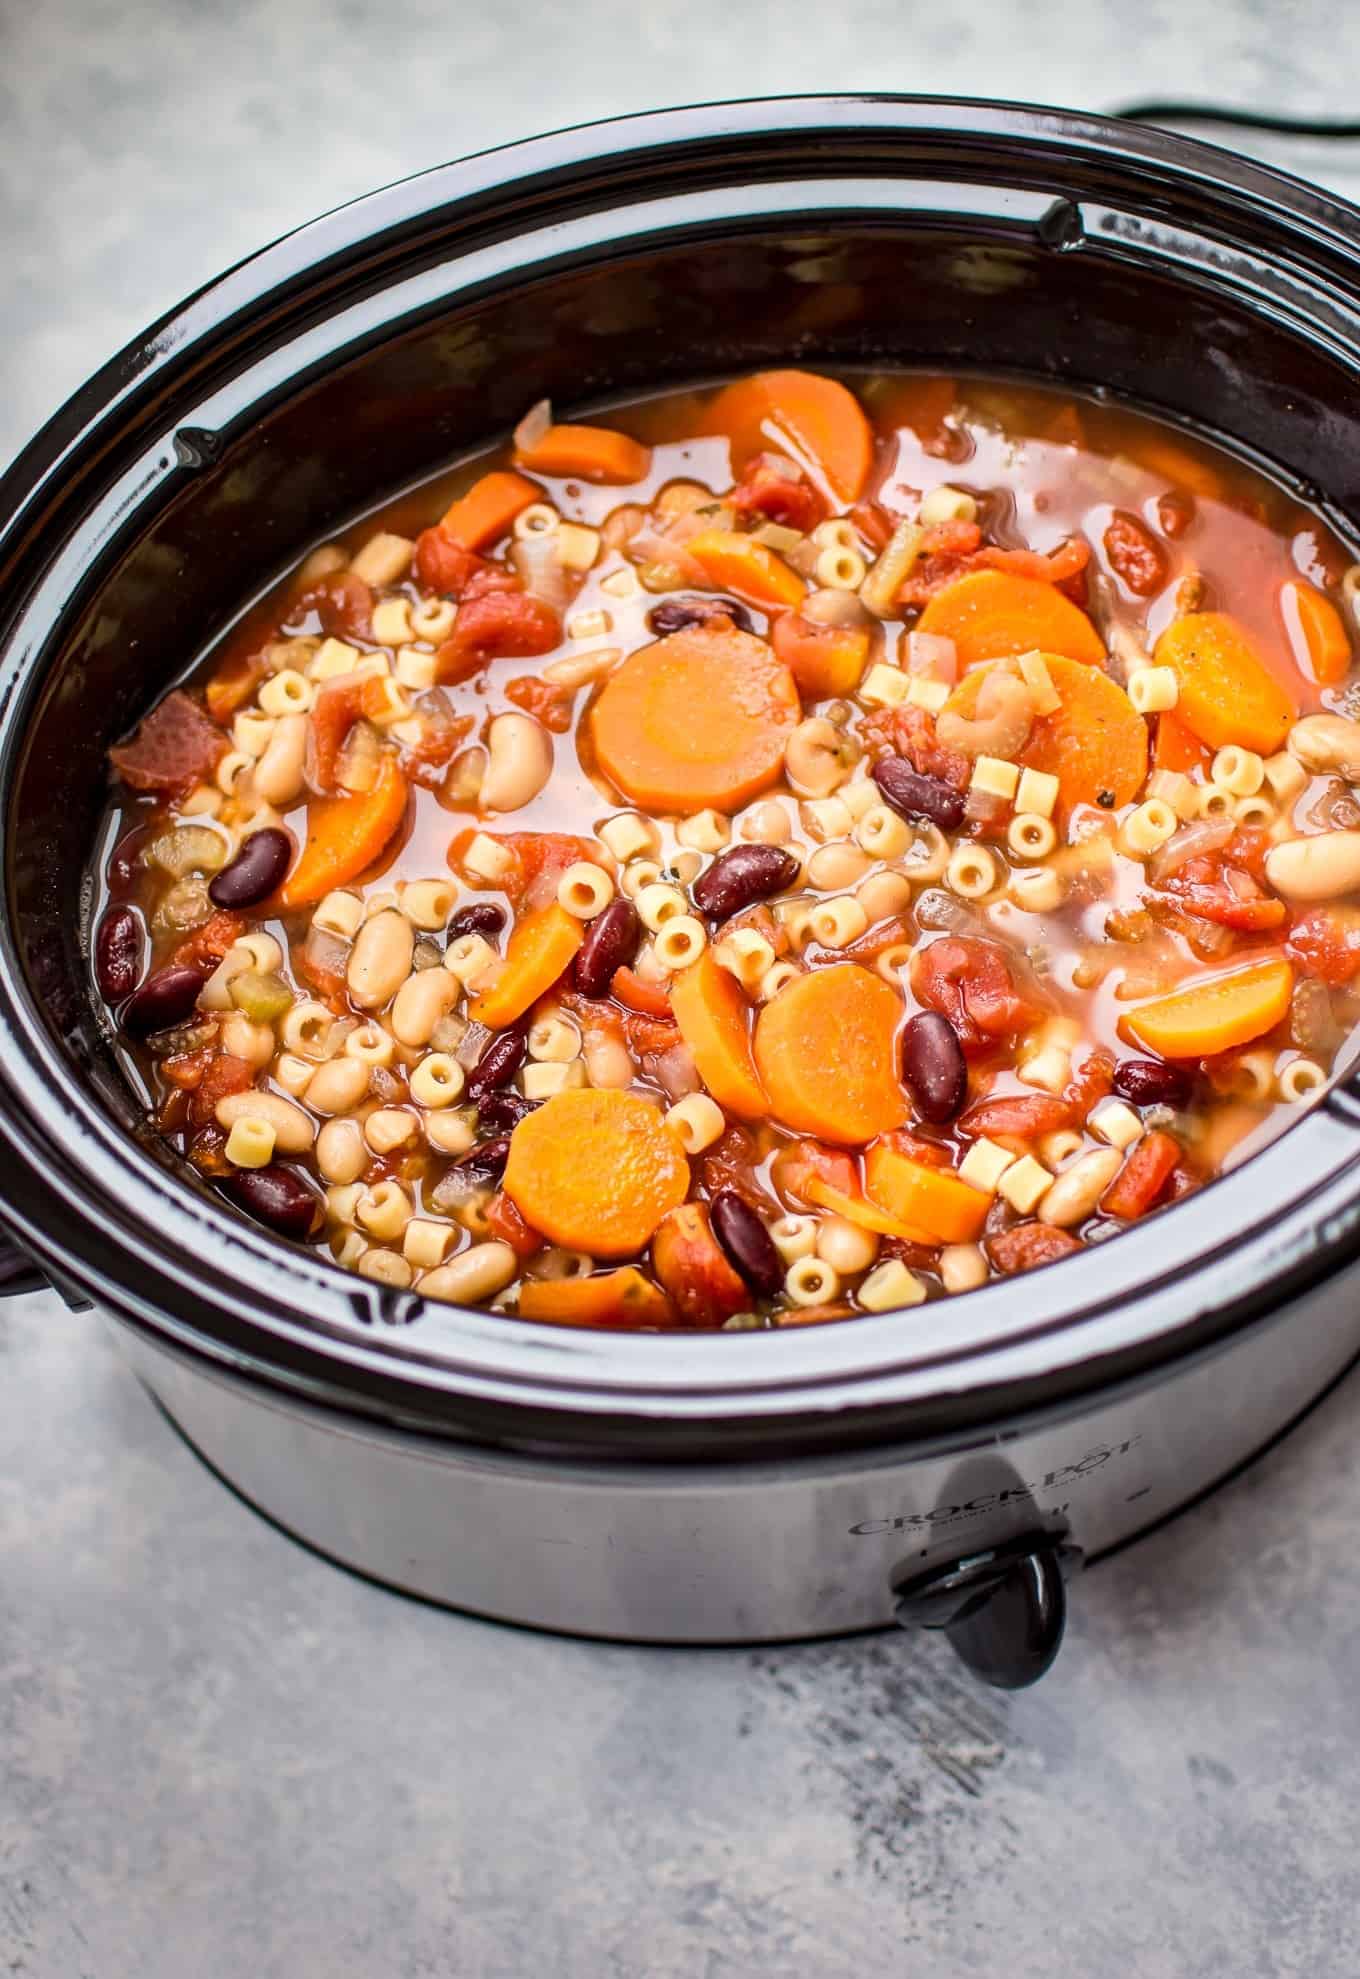 This Crockpot vegetarian pasta e fagioli soup recipe is a hearty and flavorful meatless meal that is easy to throw together